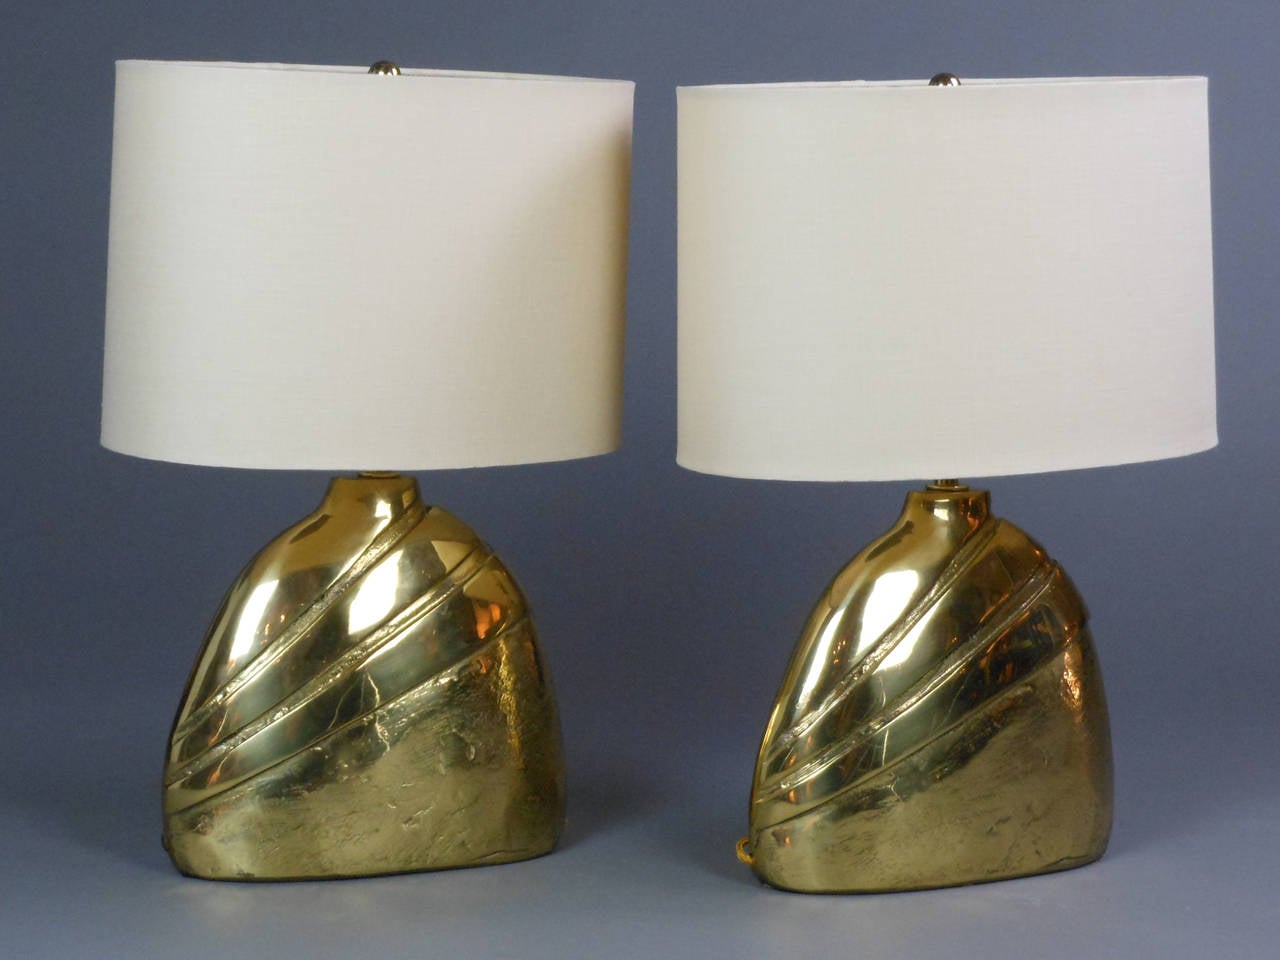 The sculptural bell form lamps incised with diagonal lines. Each lamp is signed on the side. See signature detail in the photos.

Dimensions: Height to light fitting: 10